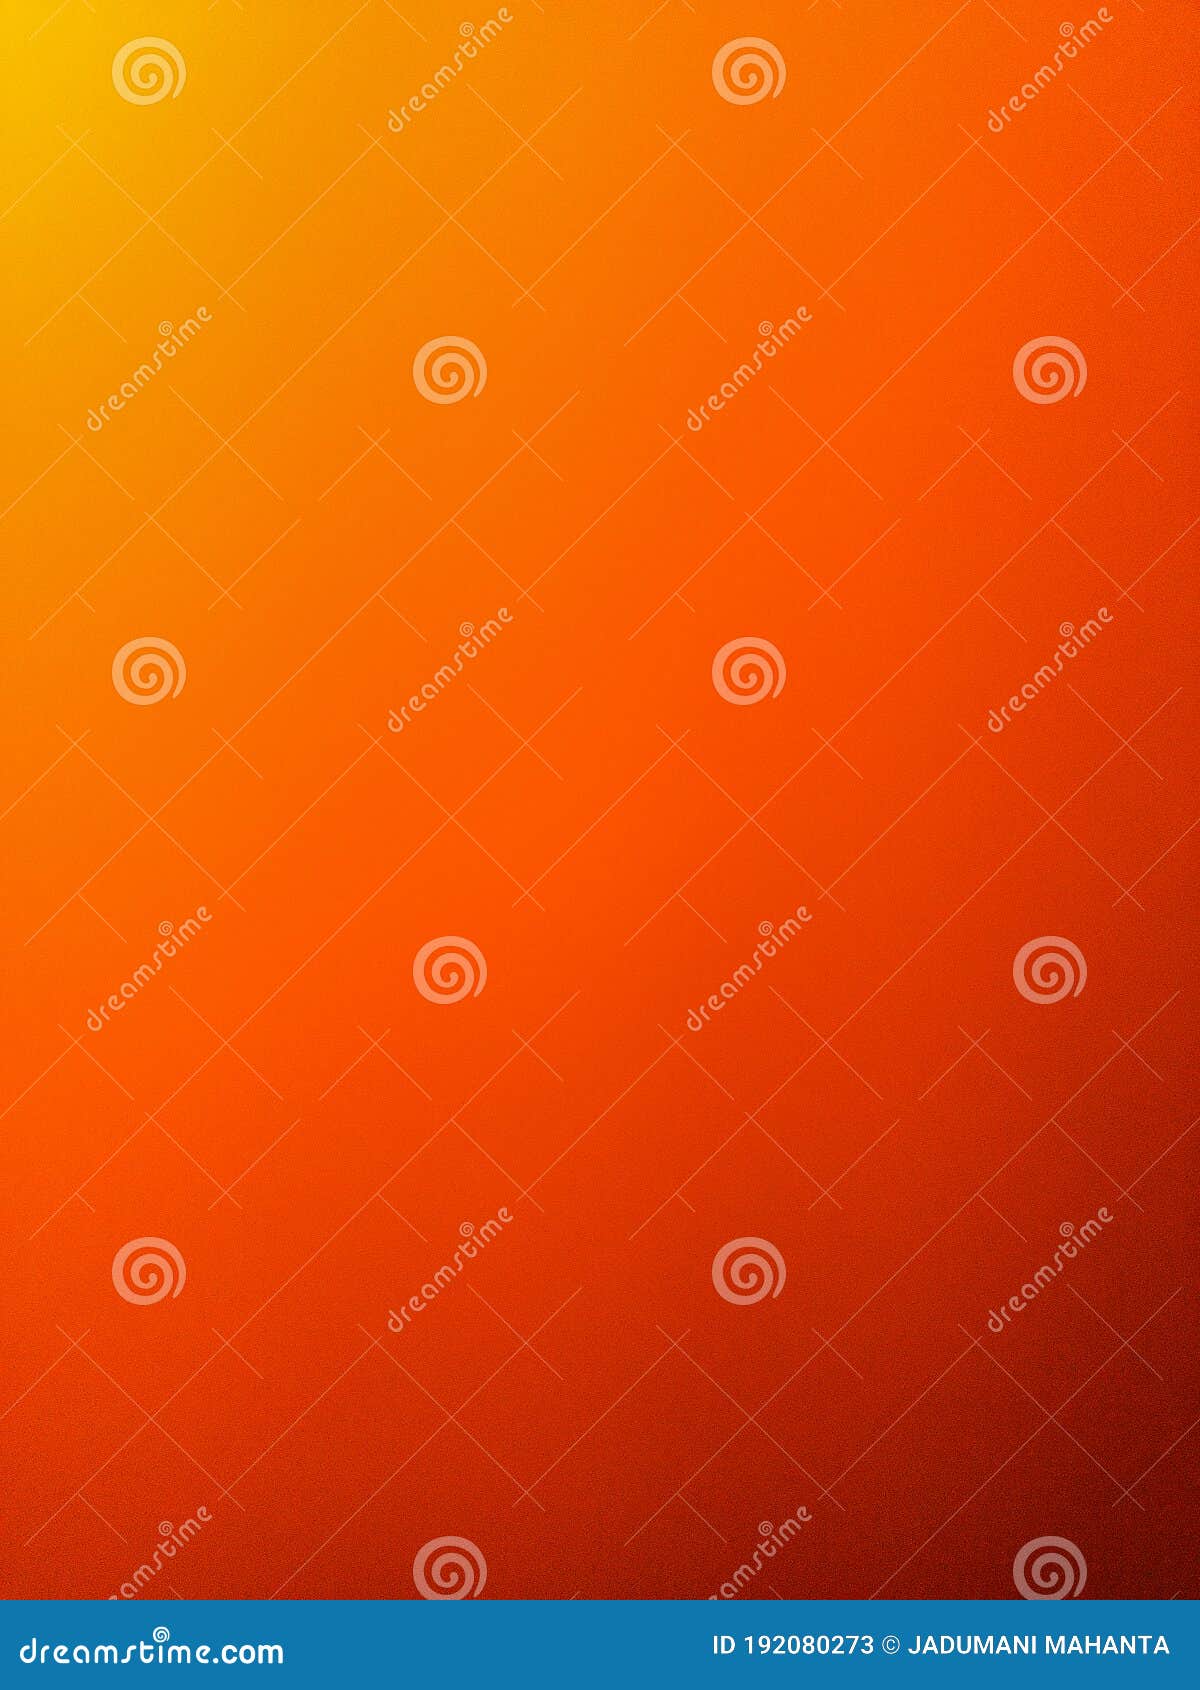 Get 500+ Background orange colour Wallpapers and Backgrounds for PC and Mobile